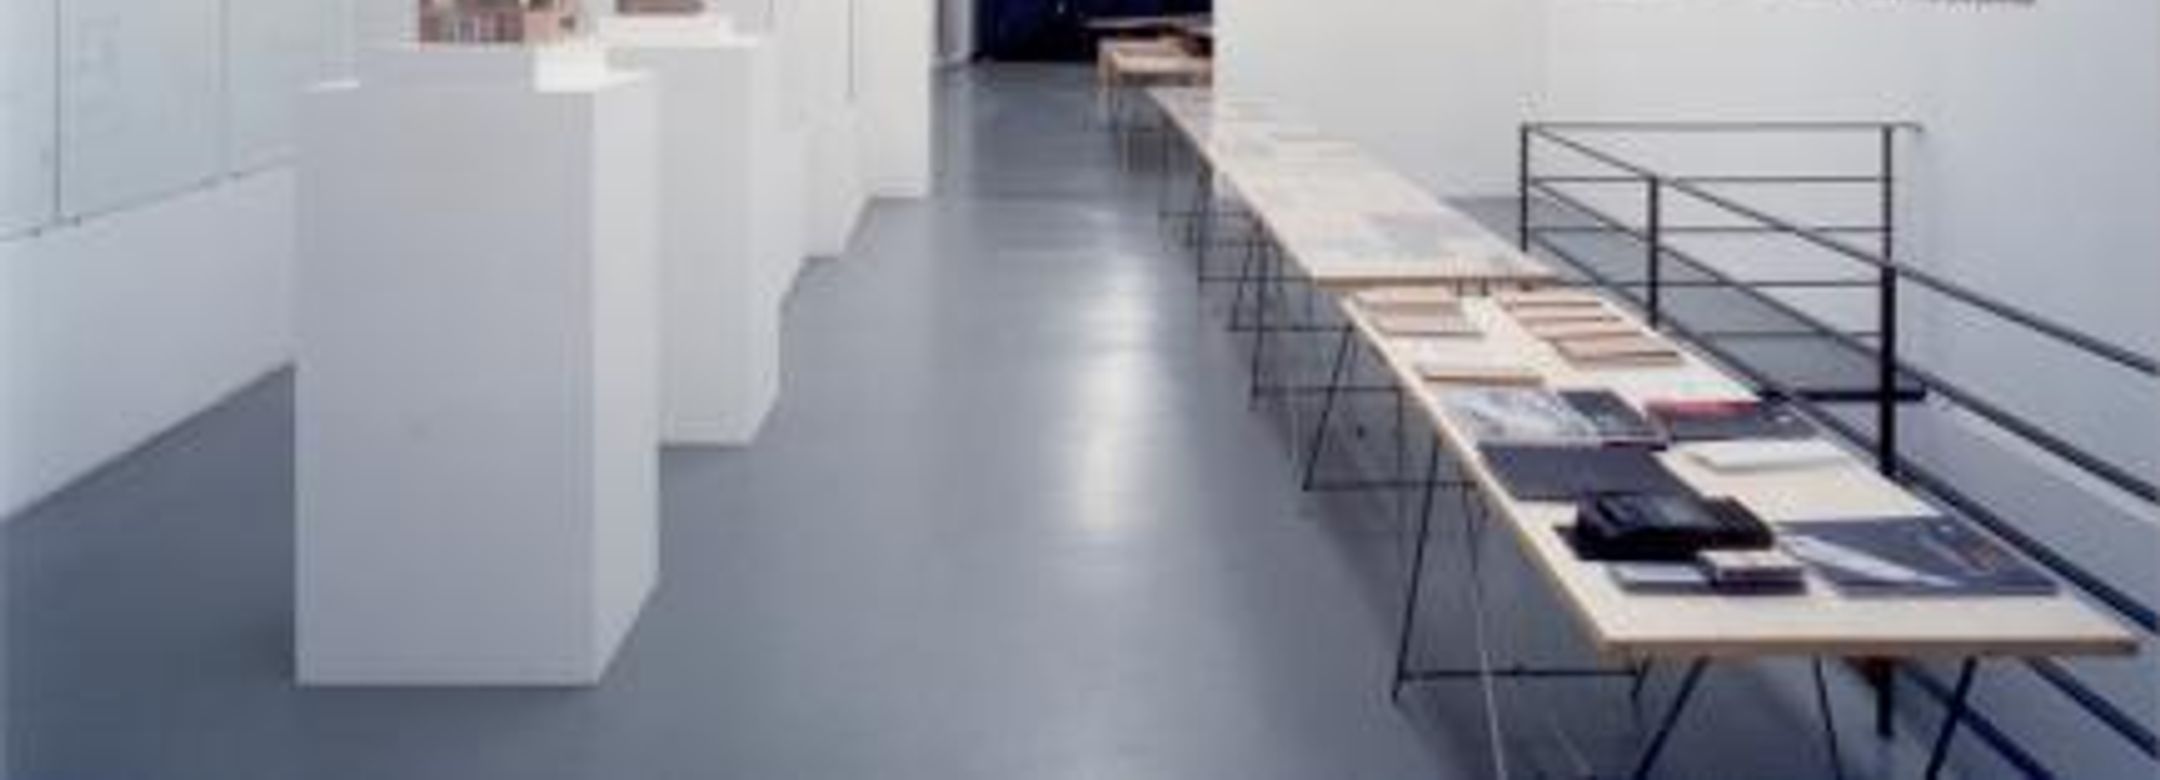 Exhibition view, Outside-in, 2000